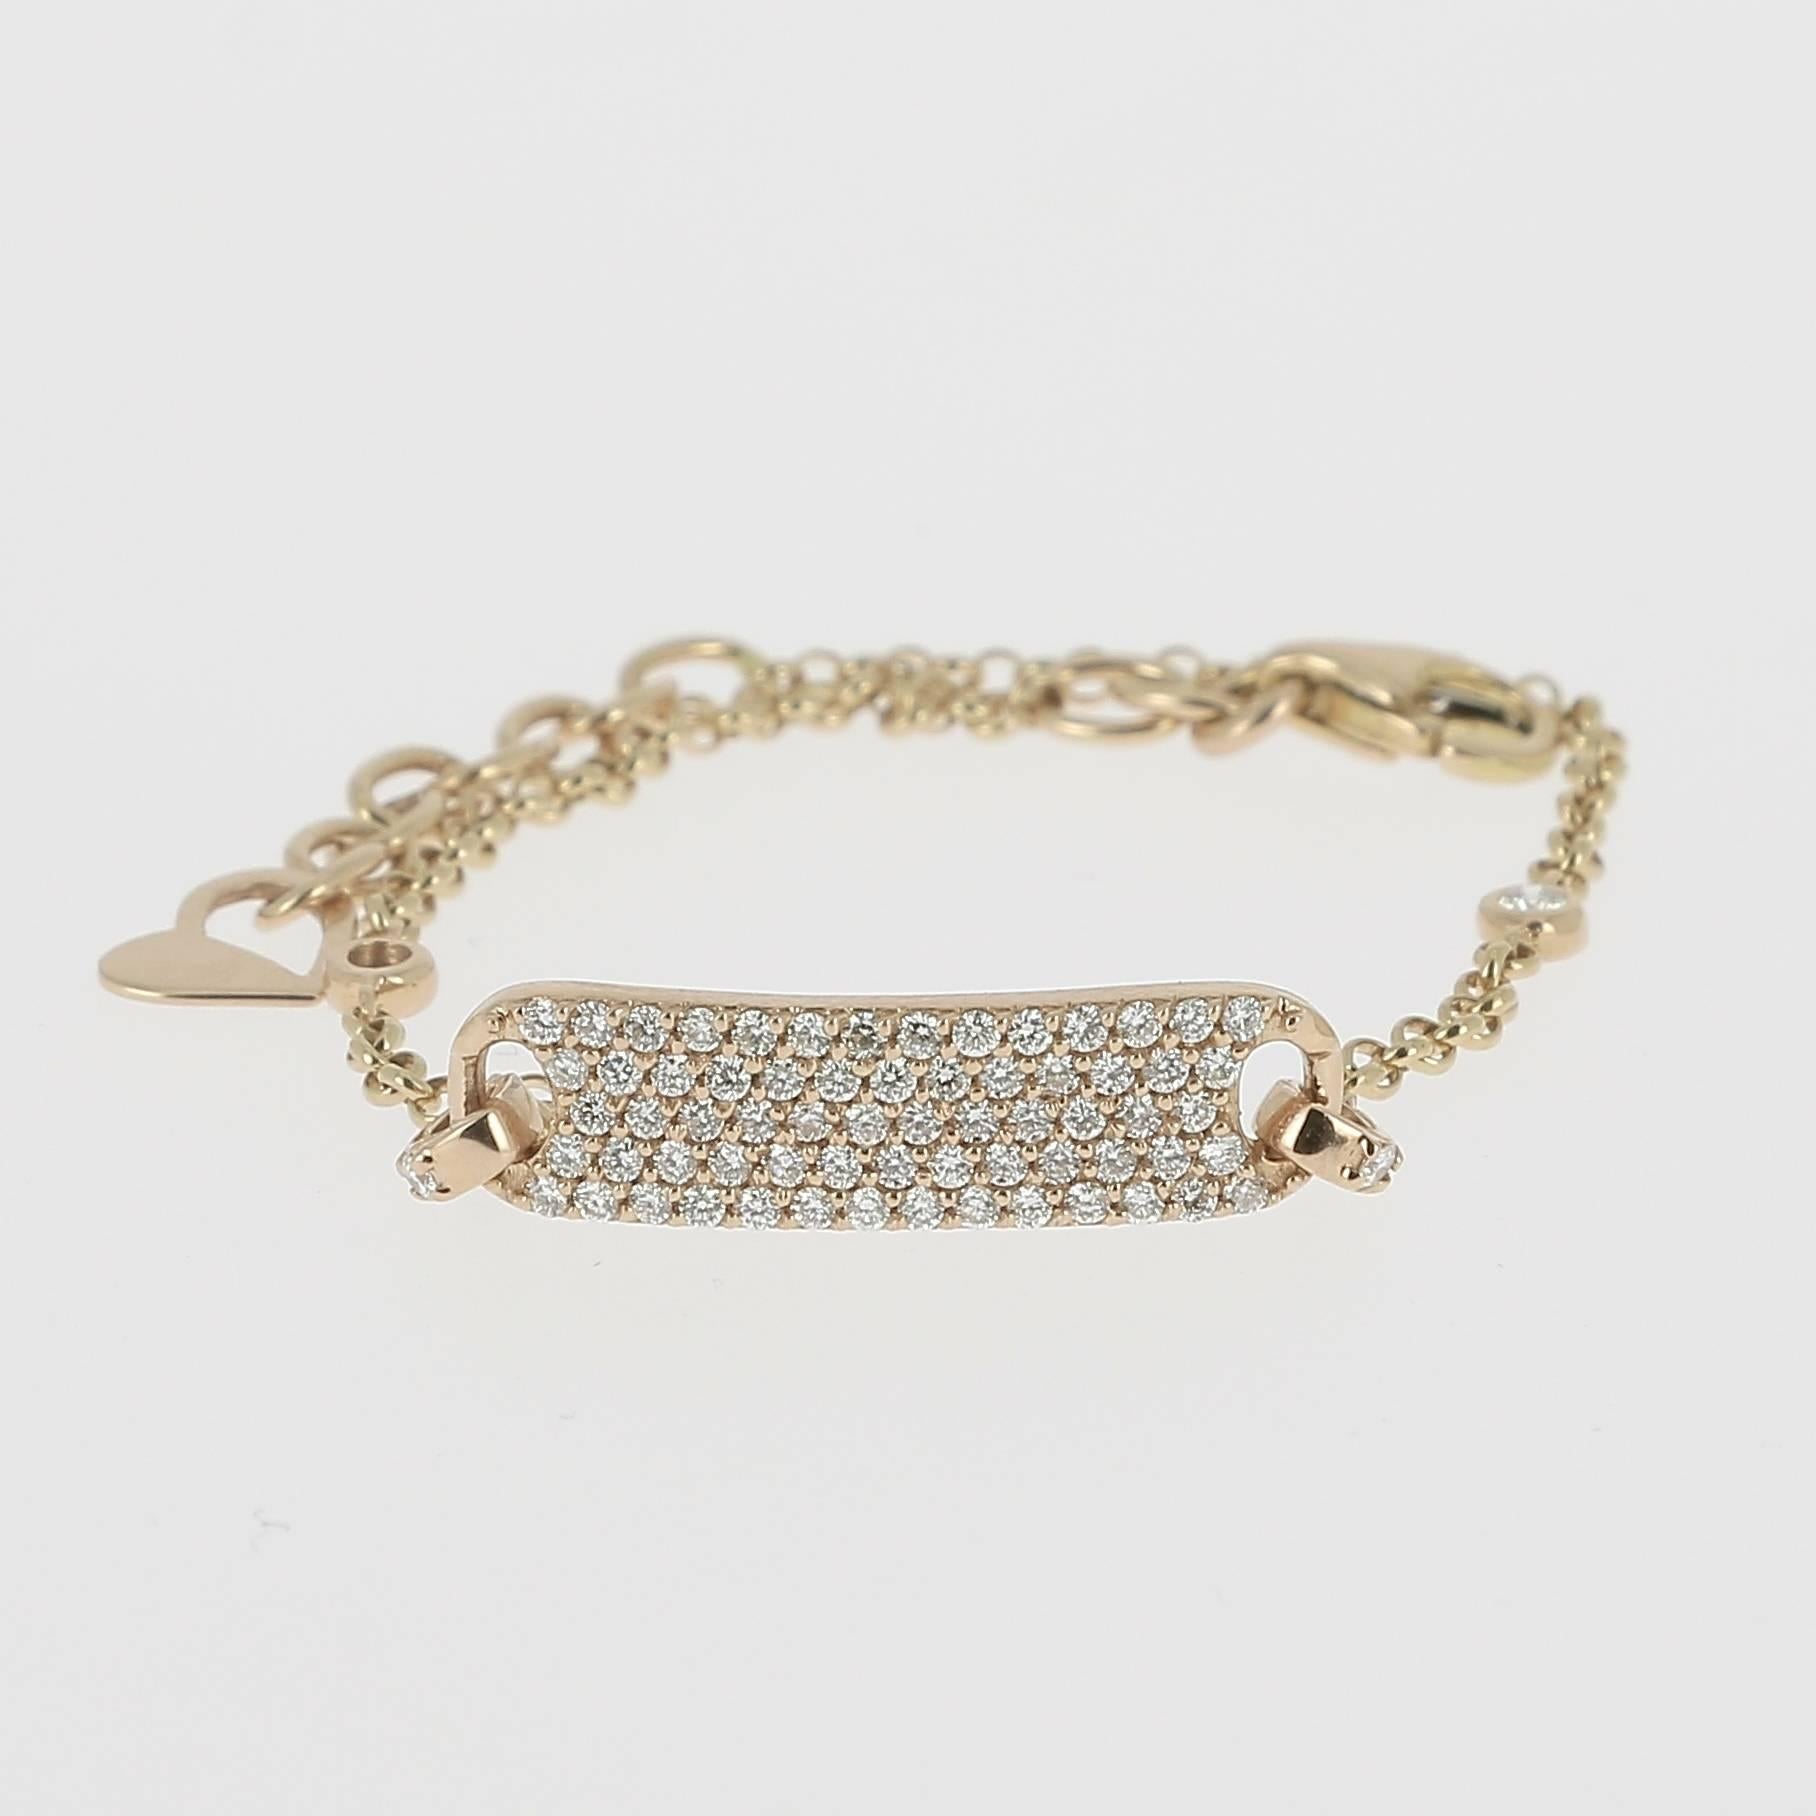 An amazing Tag Bracelet paved with Round Diamonds weighing 0.60 carats, hanging on a Chain Bracelet
The Clasp Necklace have several links to adjust the size on the wrist.
The Bracelet is available in 18K Yellow Gold, 18K Rose Gold and 18K White